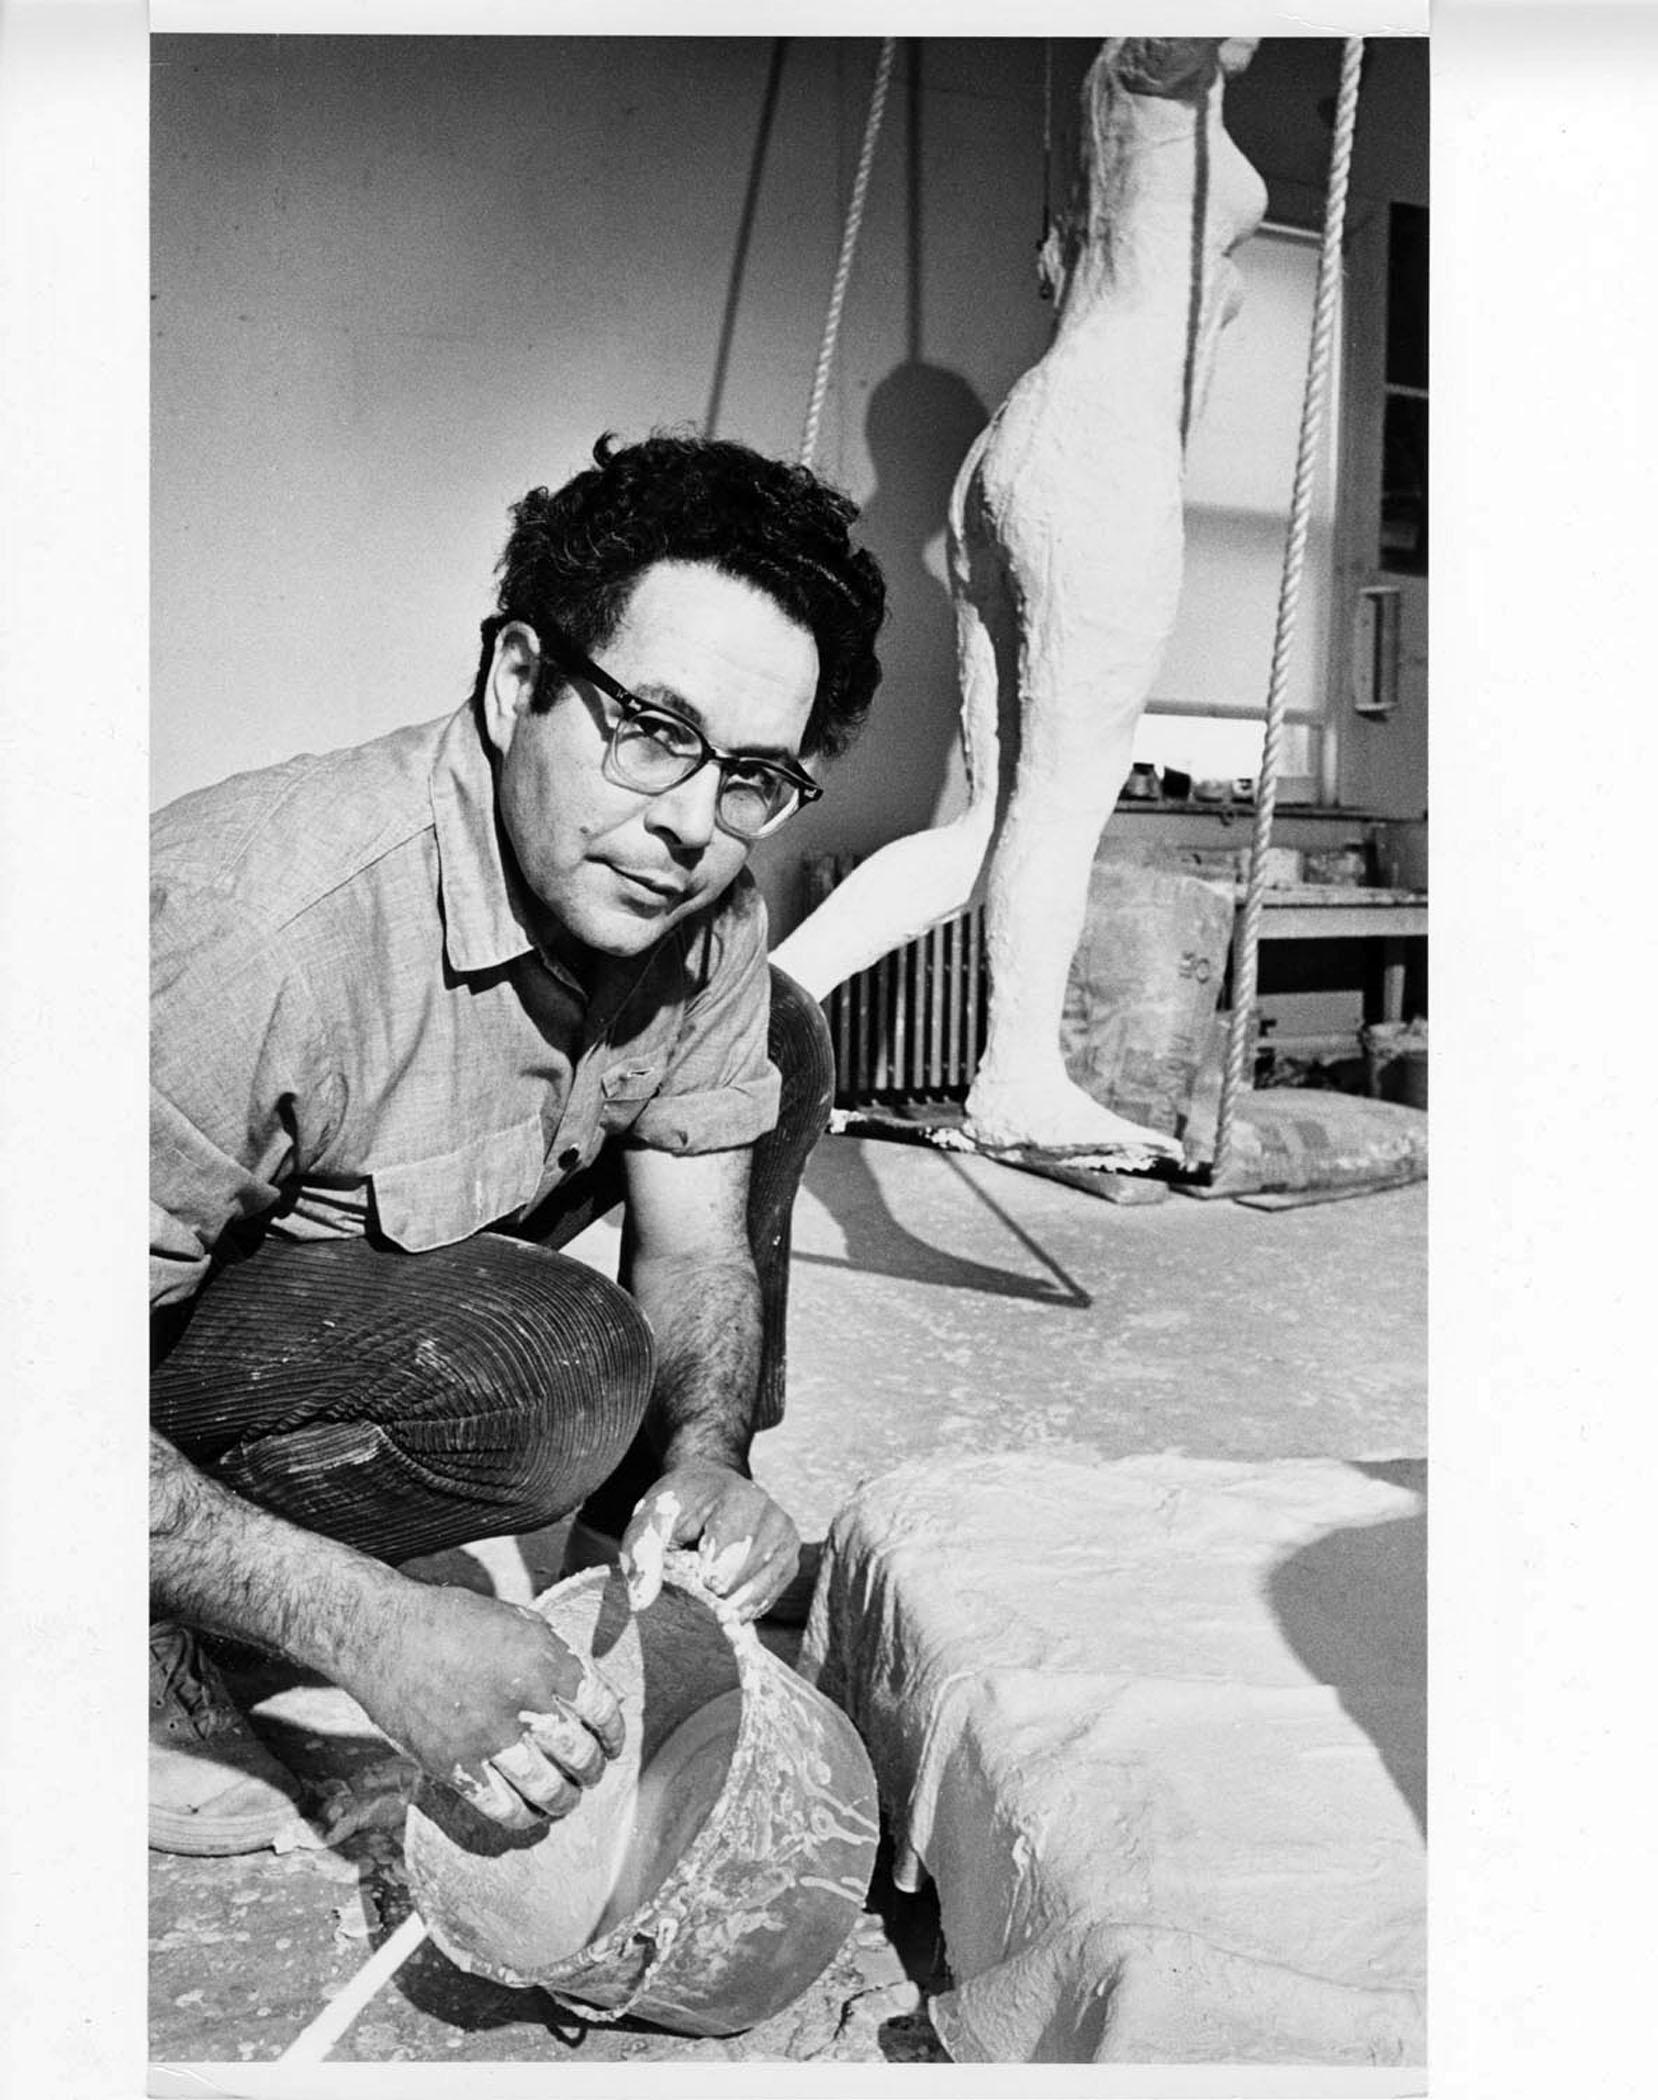 Jack Mitchell Black and White Photograph - Sculptor George Segal working in his studio